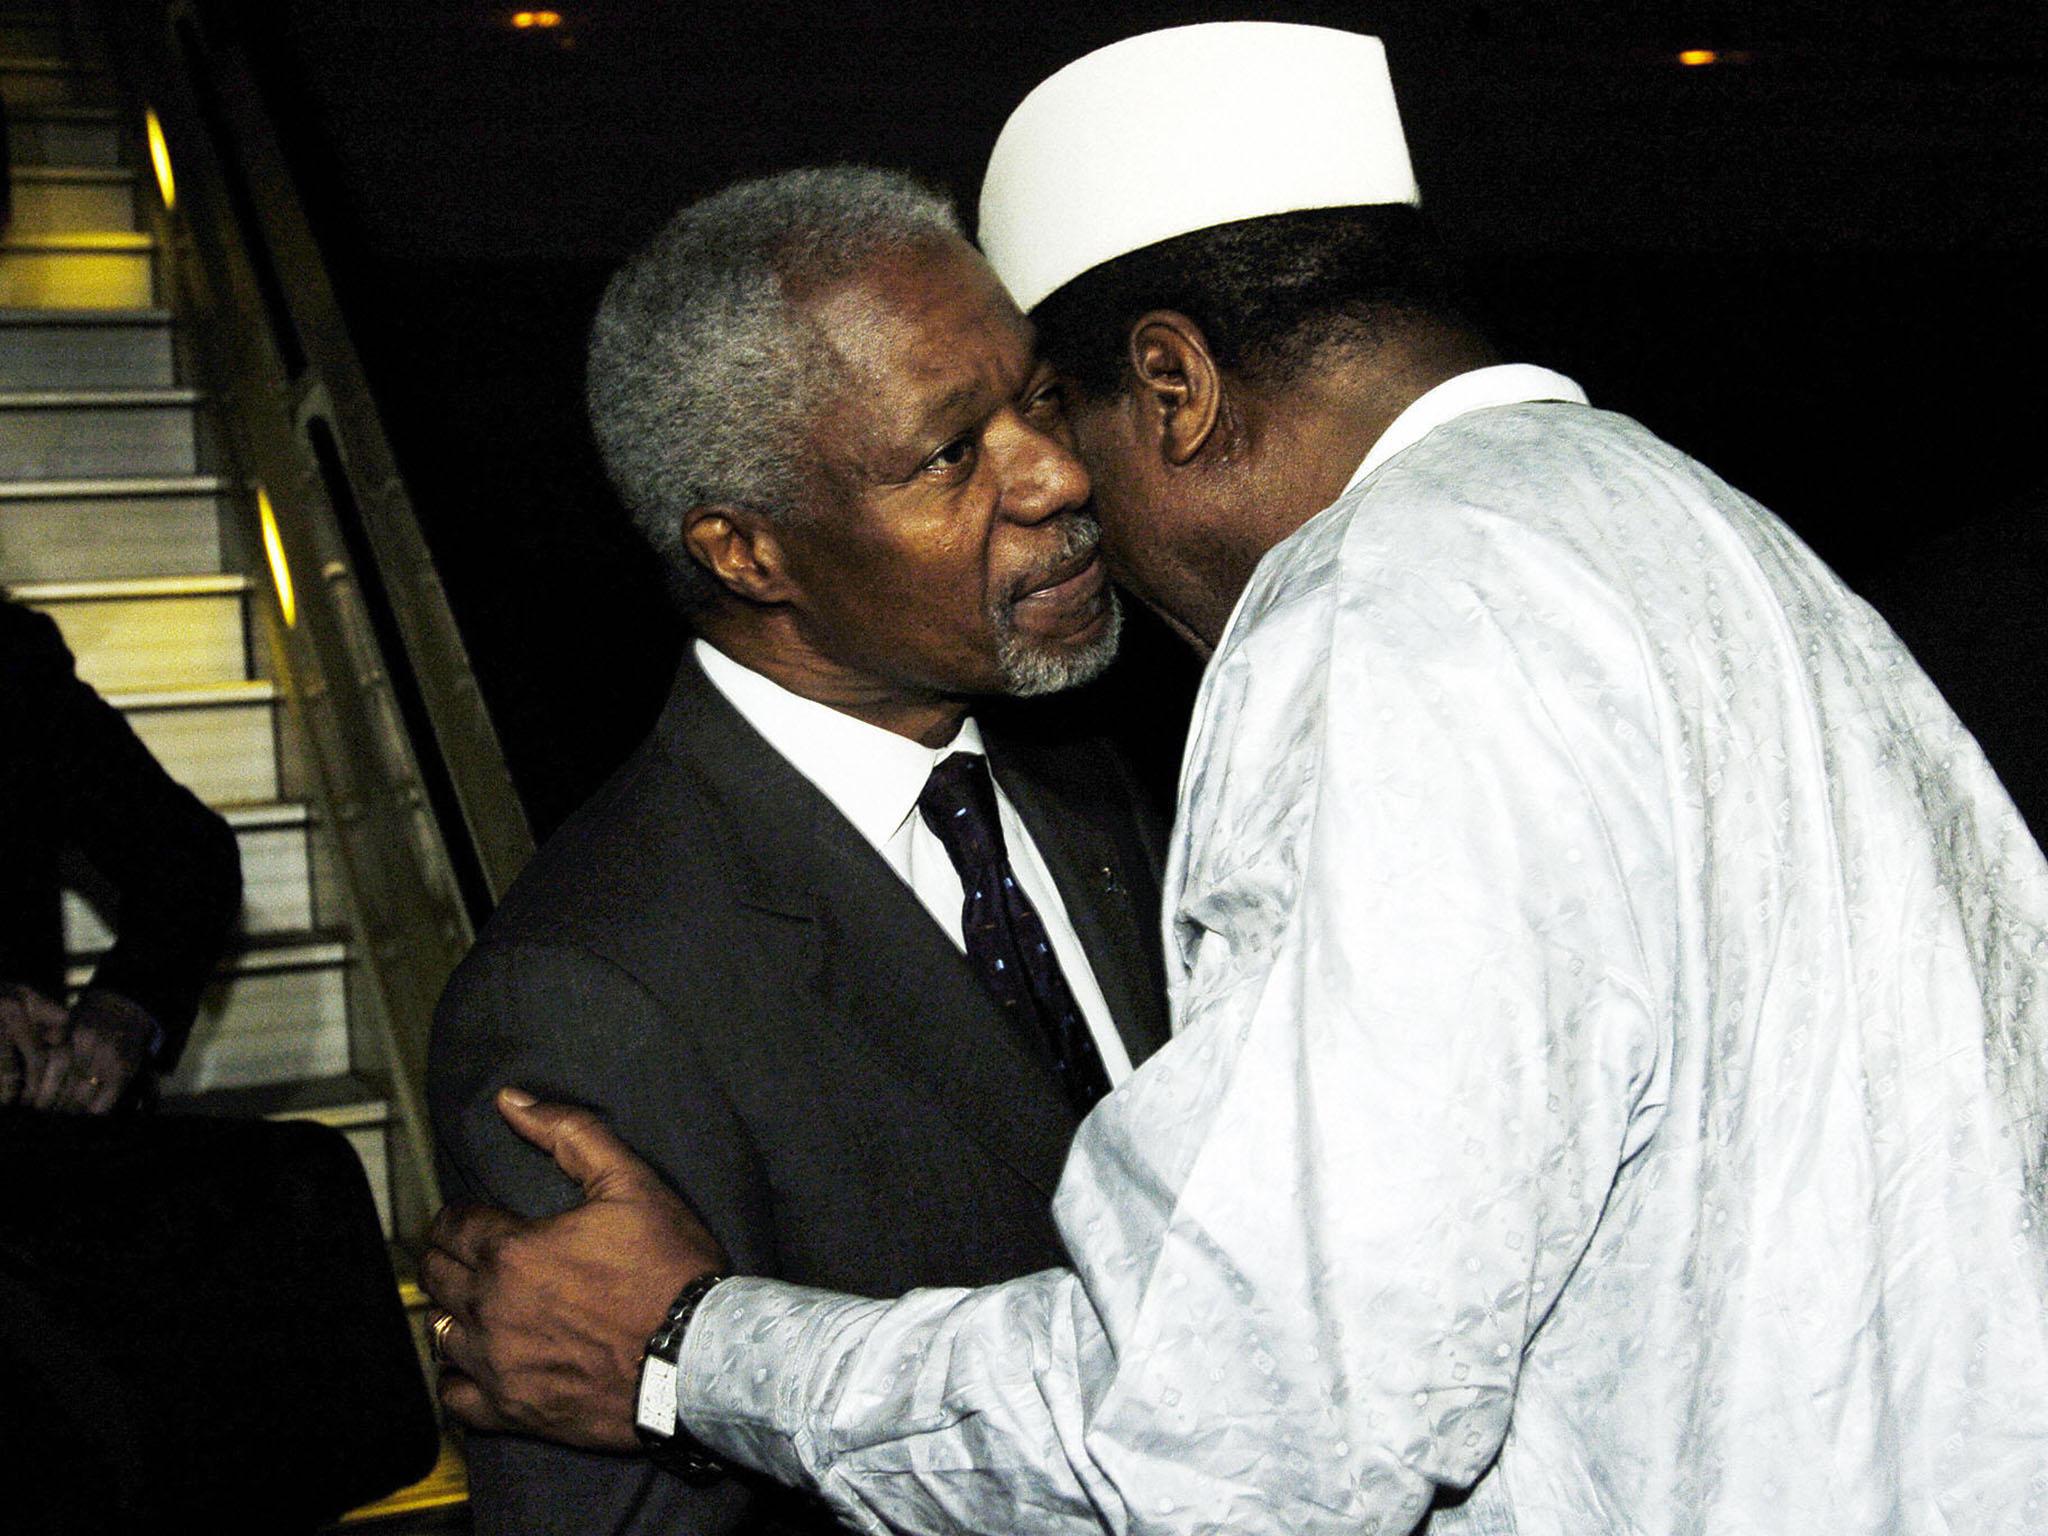 In 2005 Annan worked with the Sudanese government to accept a transfer of power from the African Union peacekeeping mission to a UN one